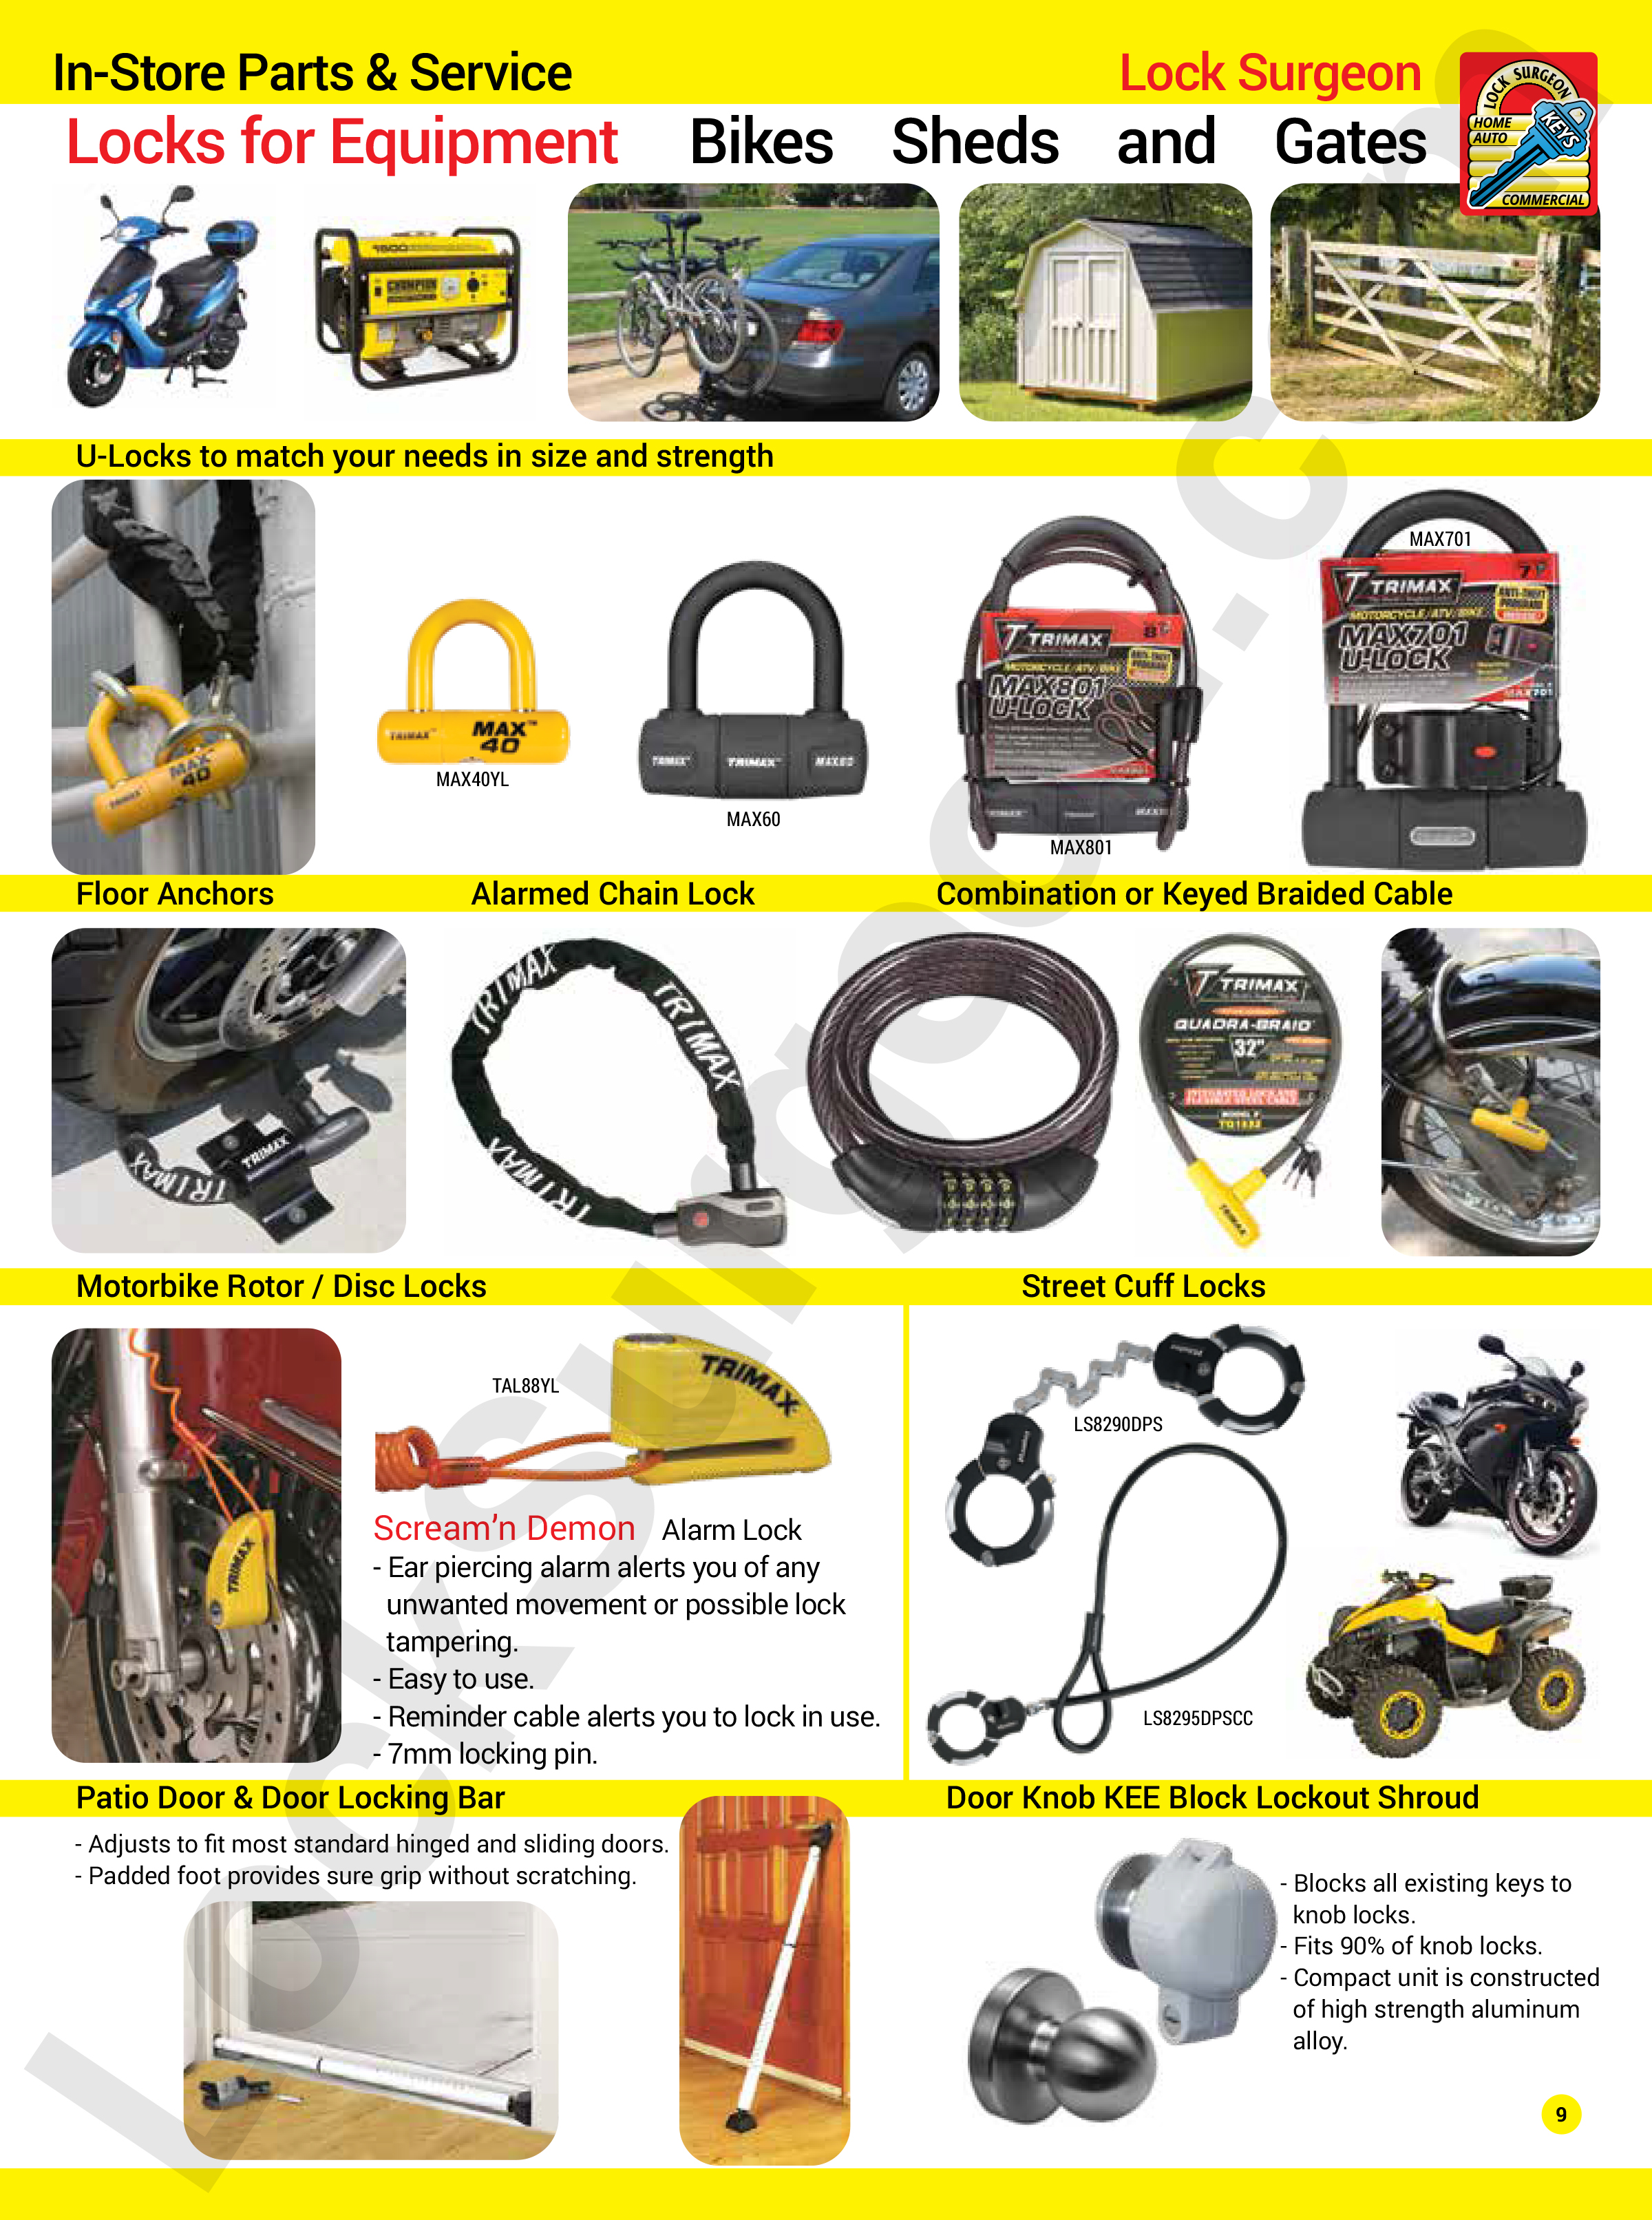 South Edmonton Lock Surgeon superior locks secure your equipment from theft.